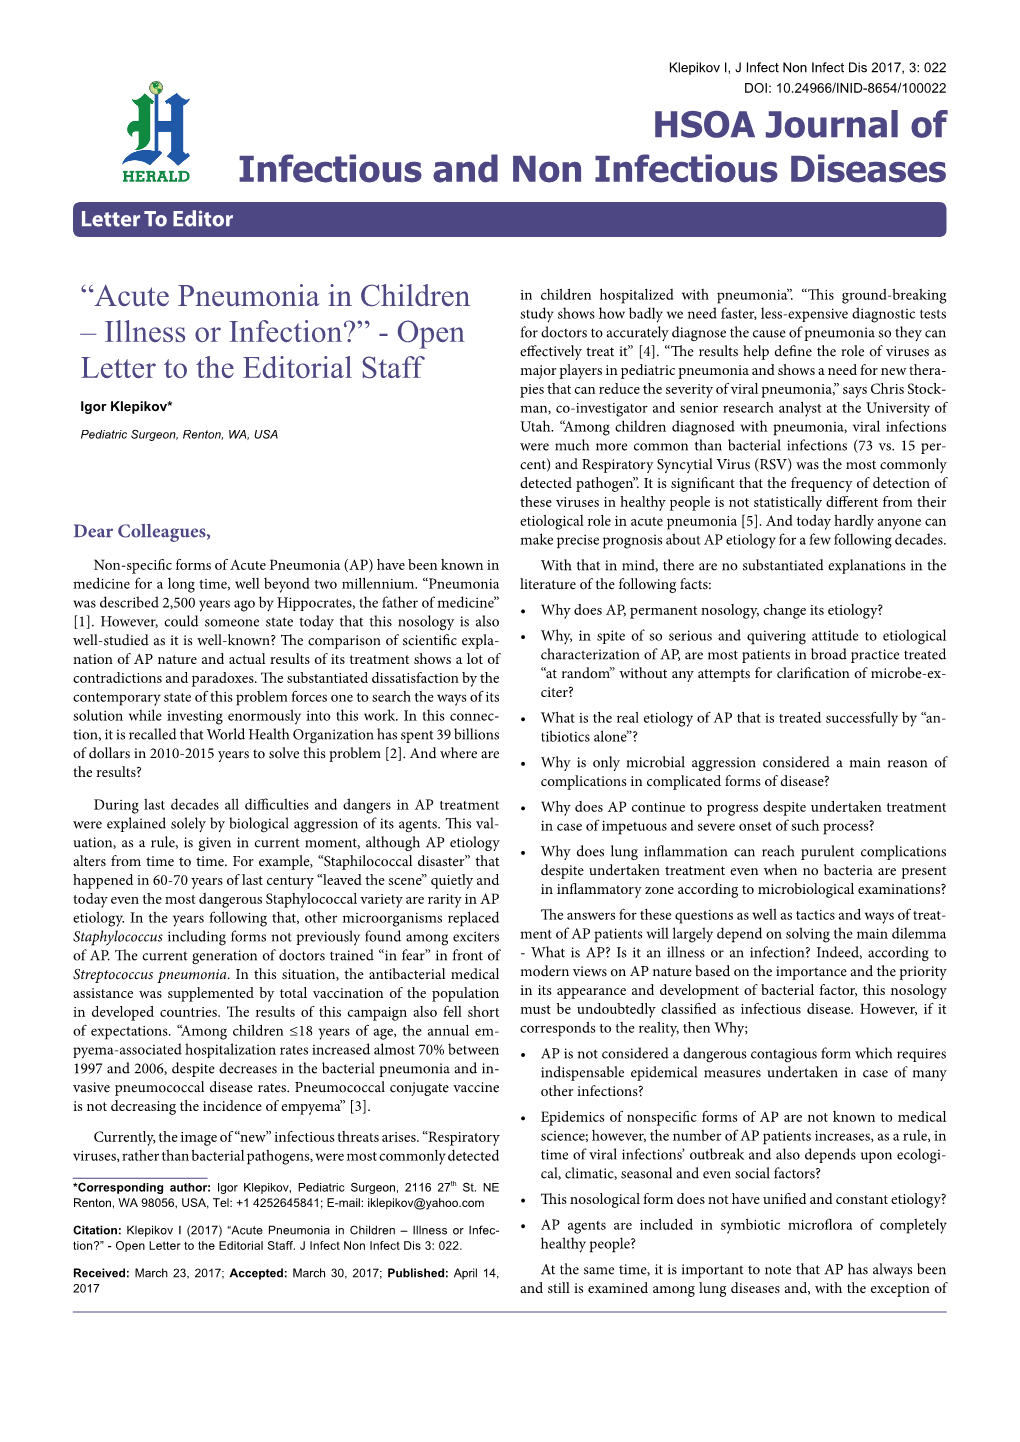 Acute Pneumonia in Children – Illness Or Infection?” - Open Letter to the Editorial Staff